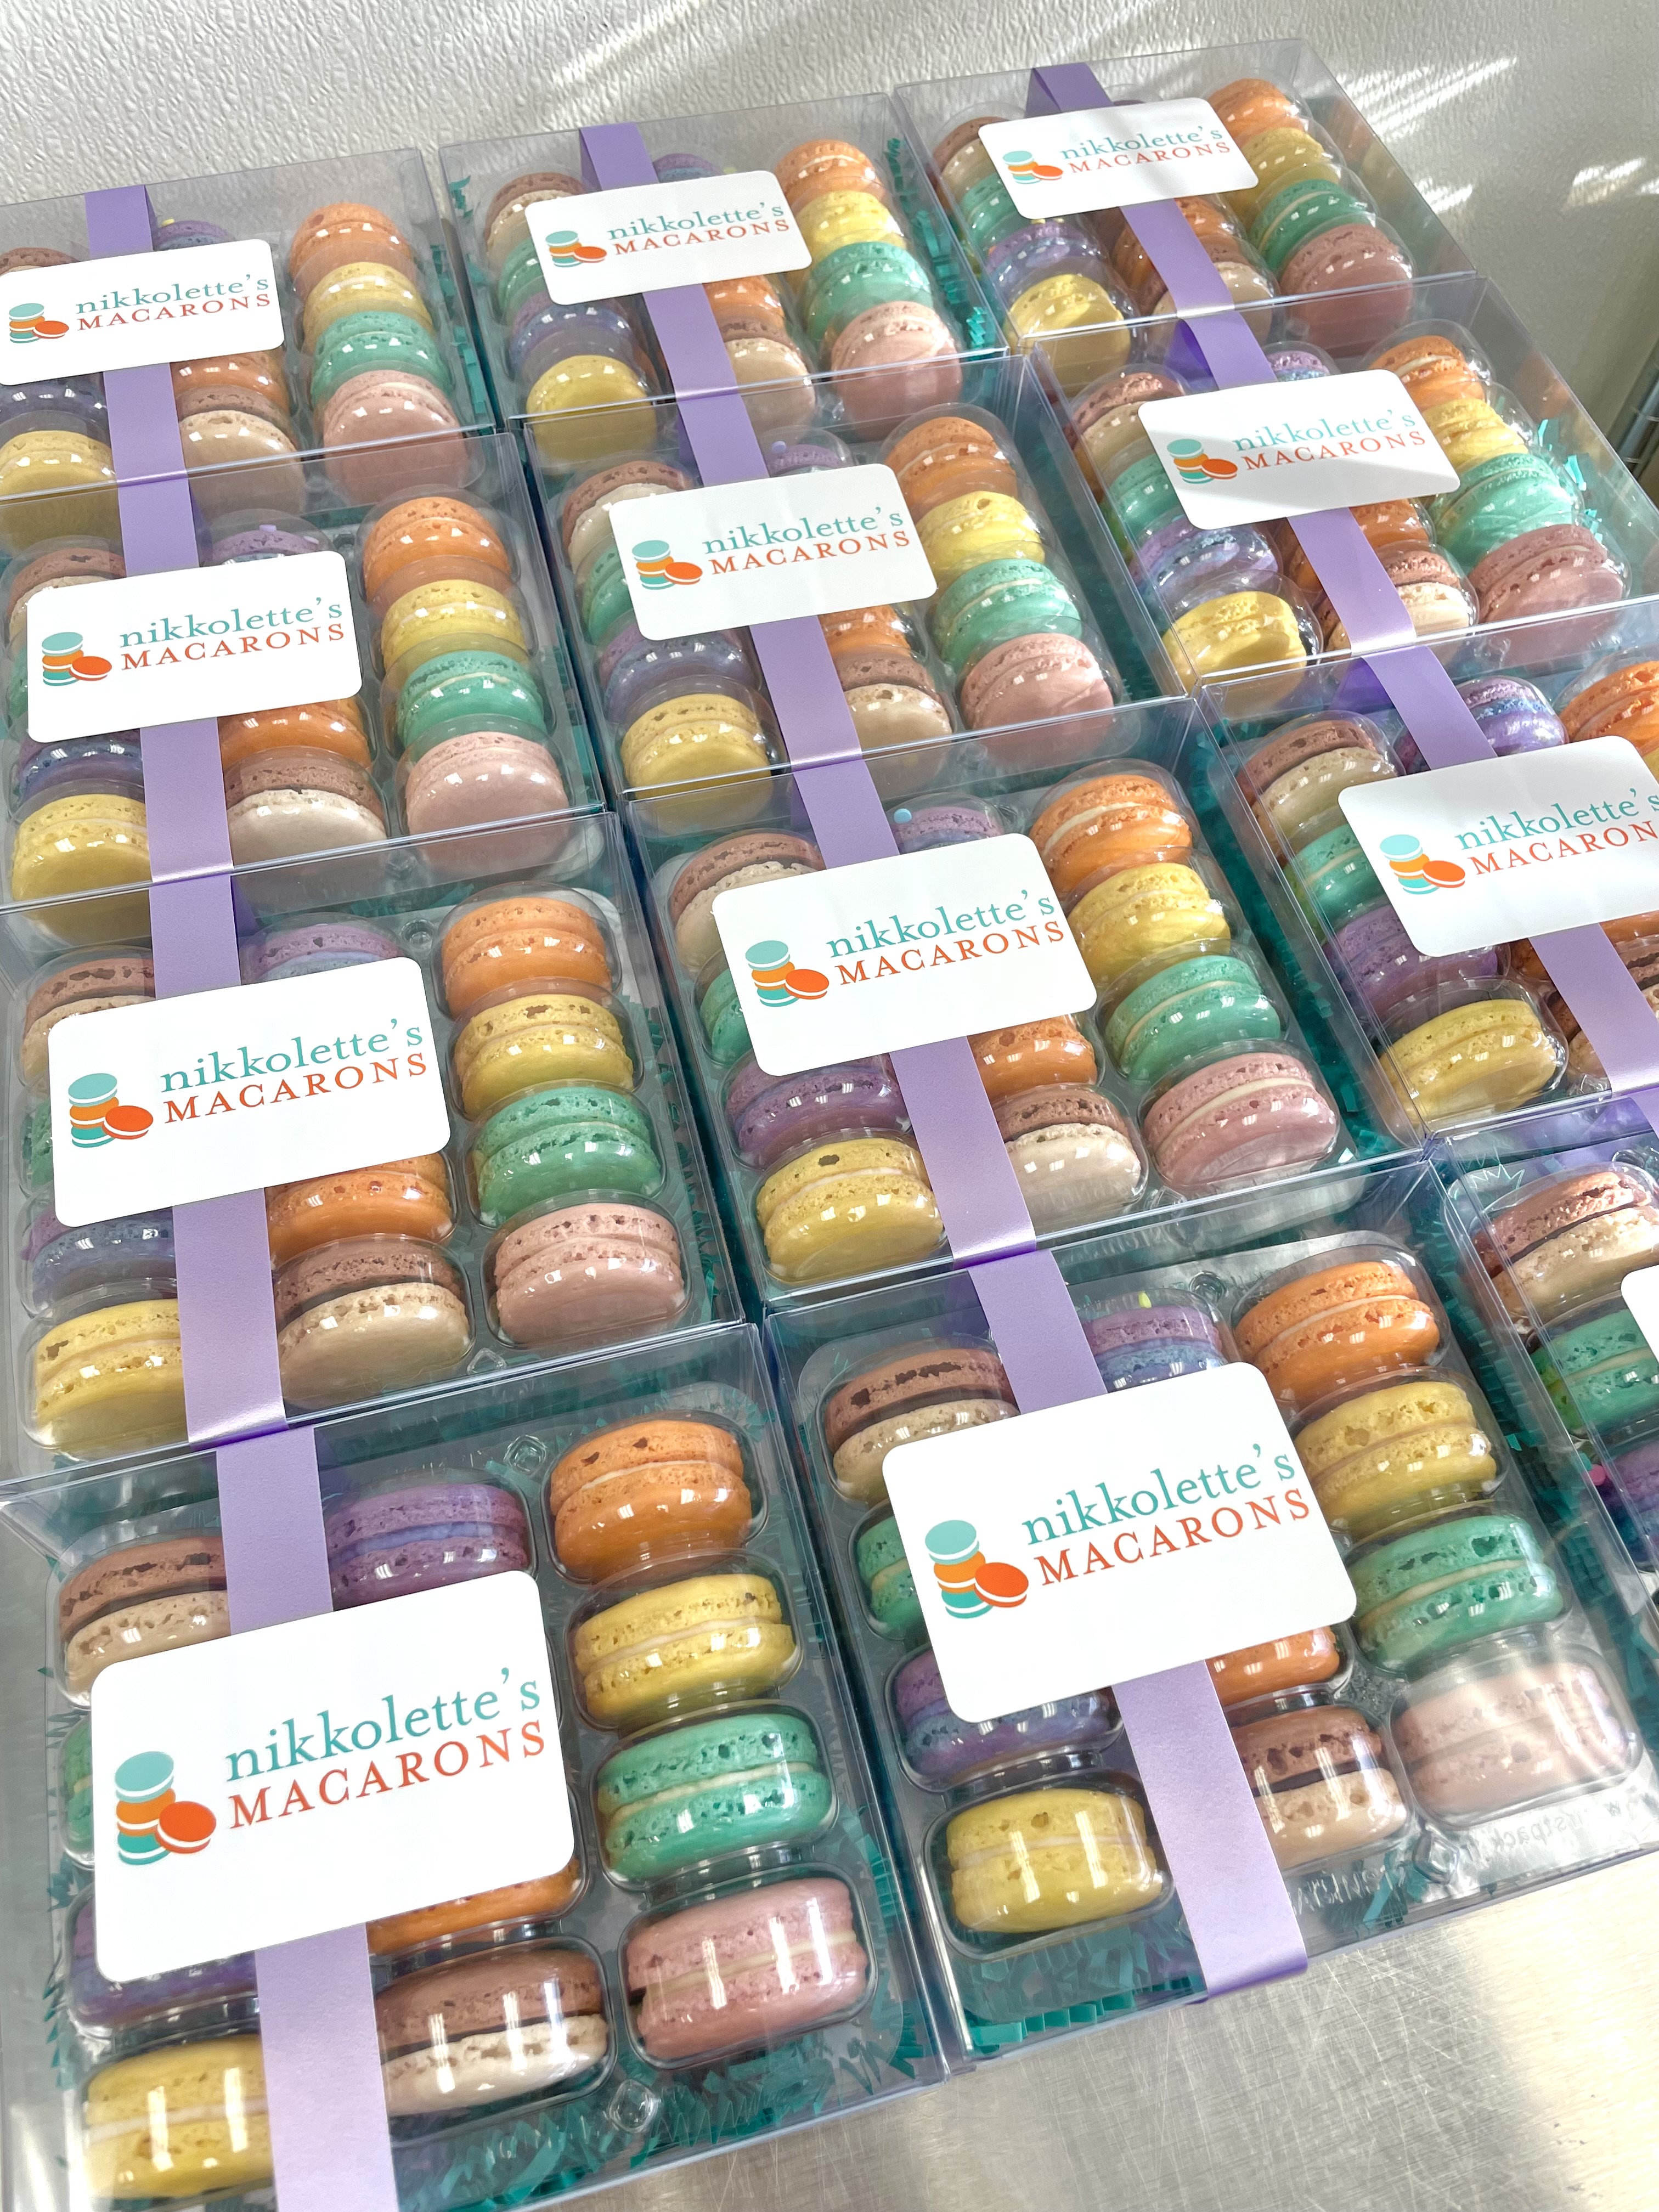 Easter Macarons in Plymouth Minnesota